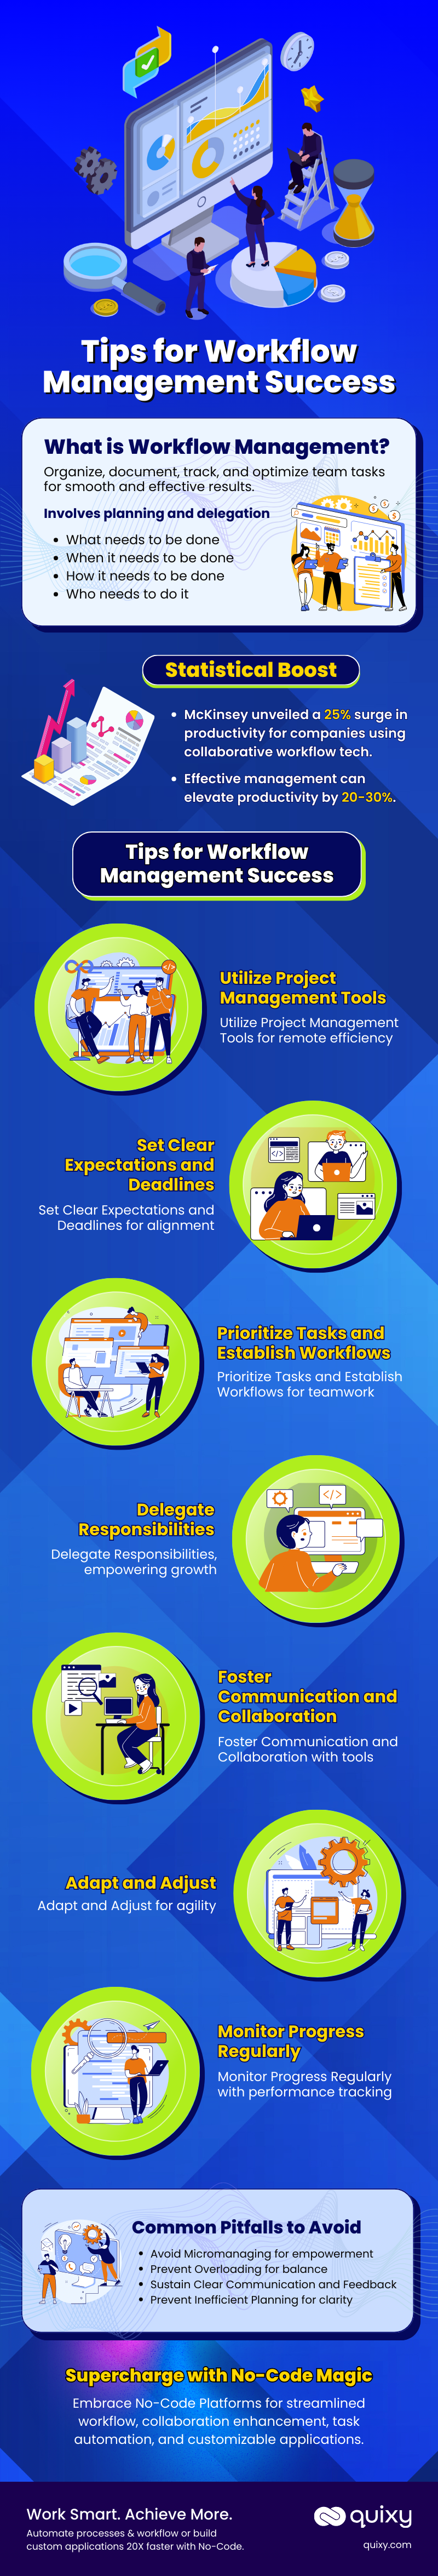 Tips for Workflow Management Success Infographic